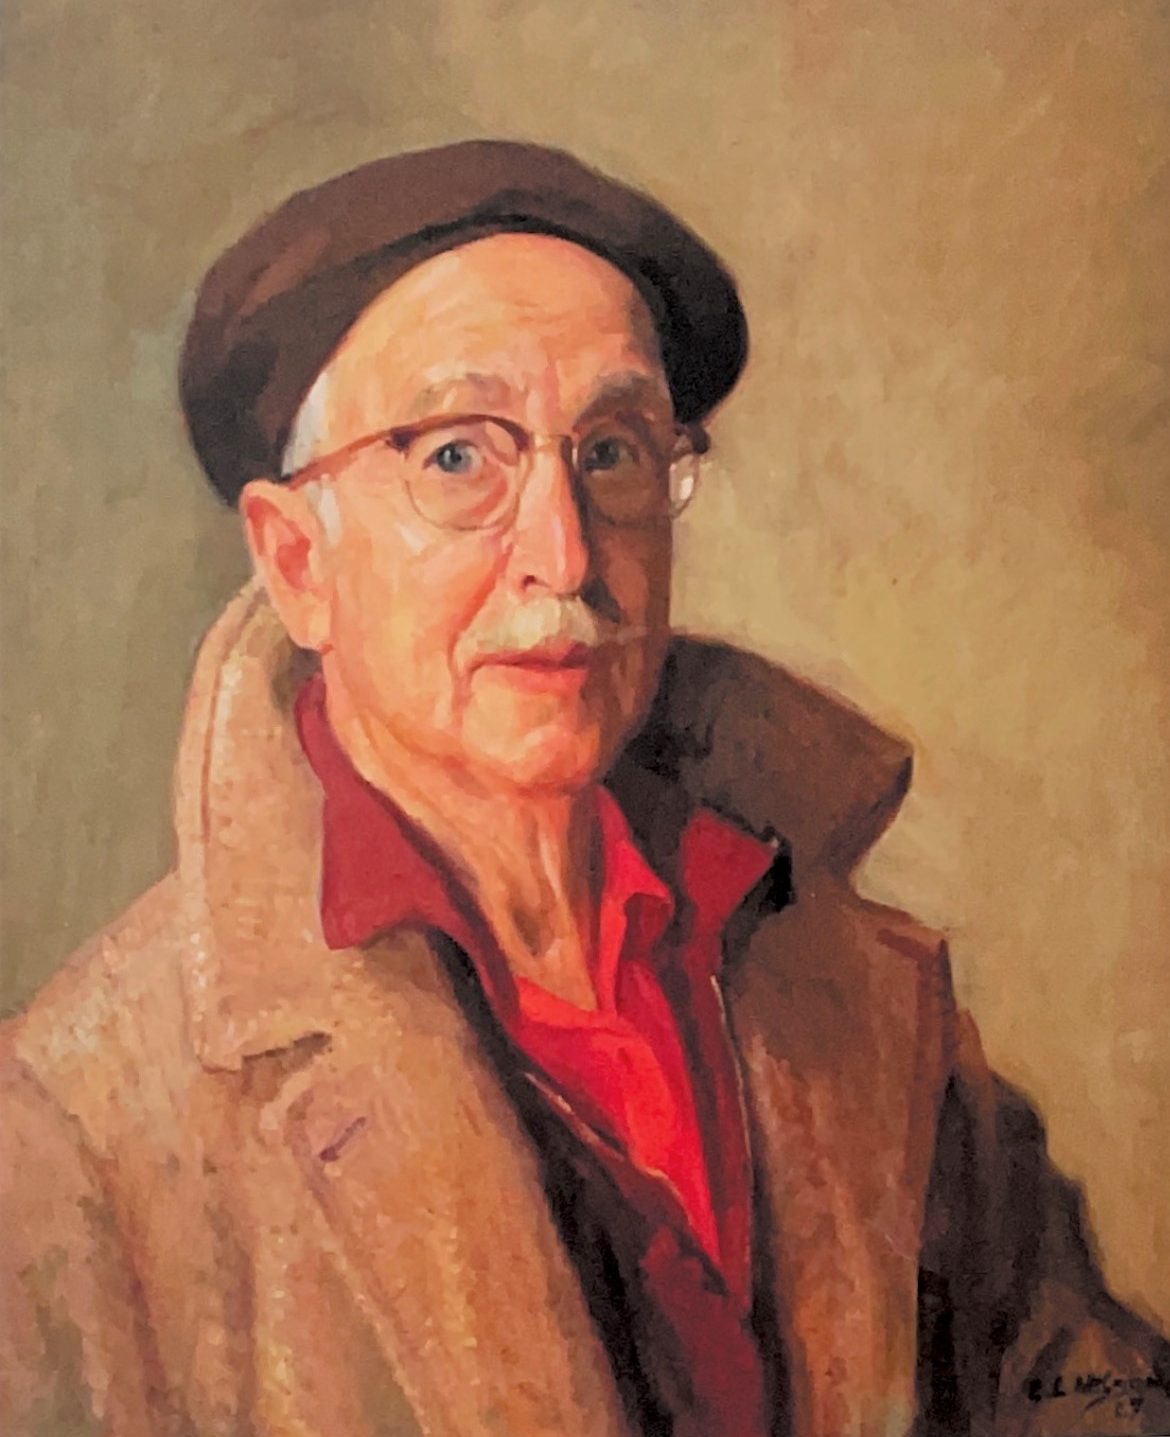 Portrait painting of a man from the chest up wearing a red shirt, light colored coat, a hat, and glasses